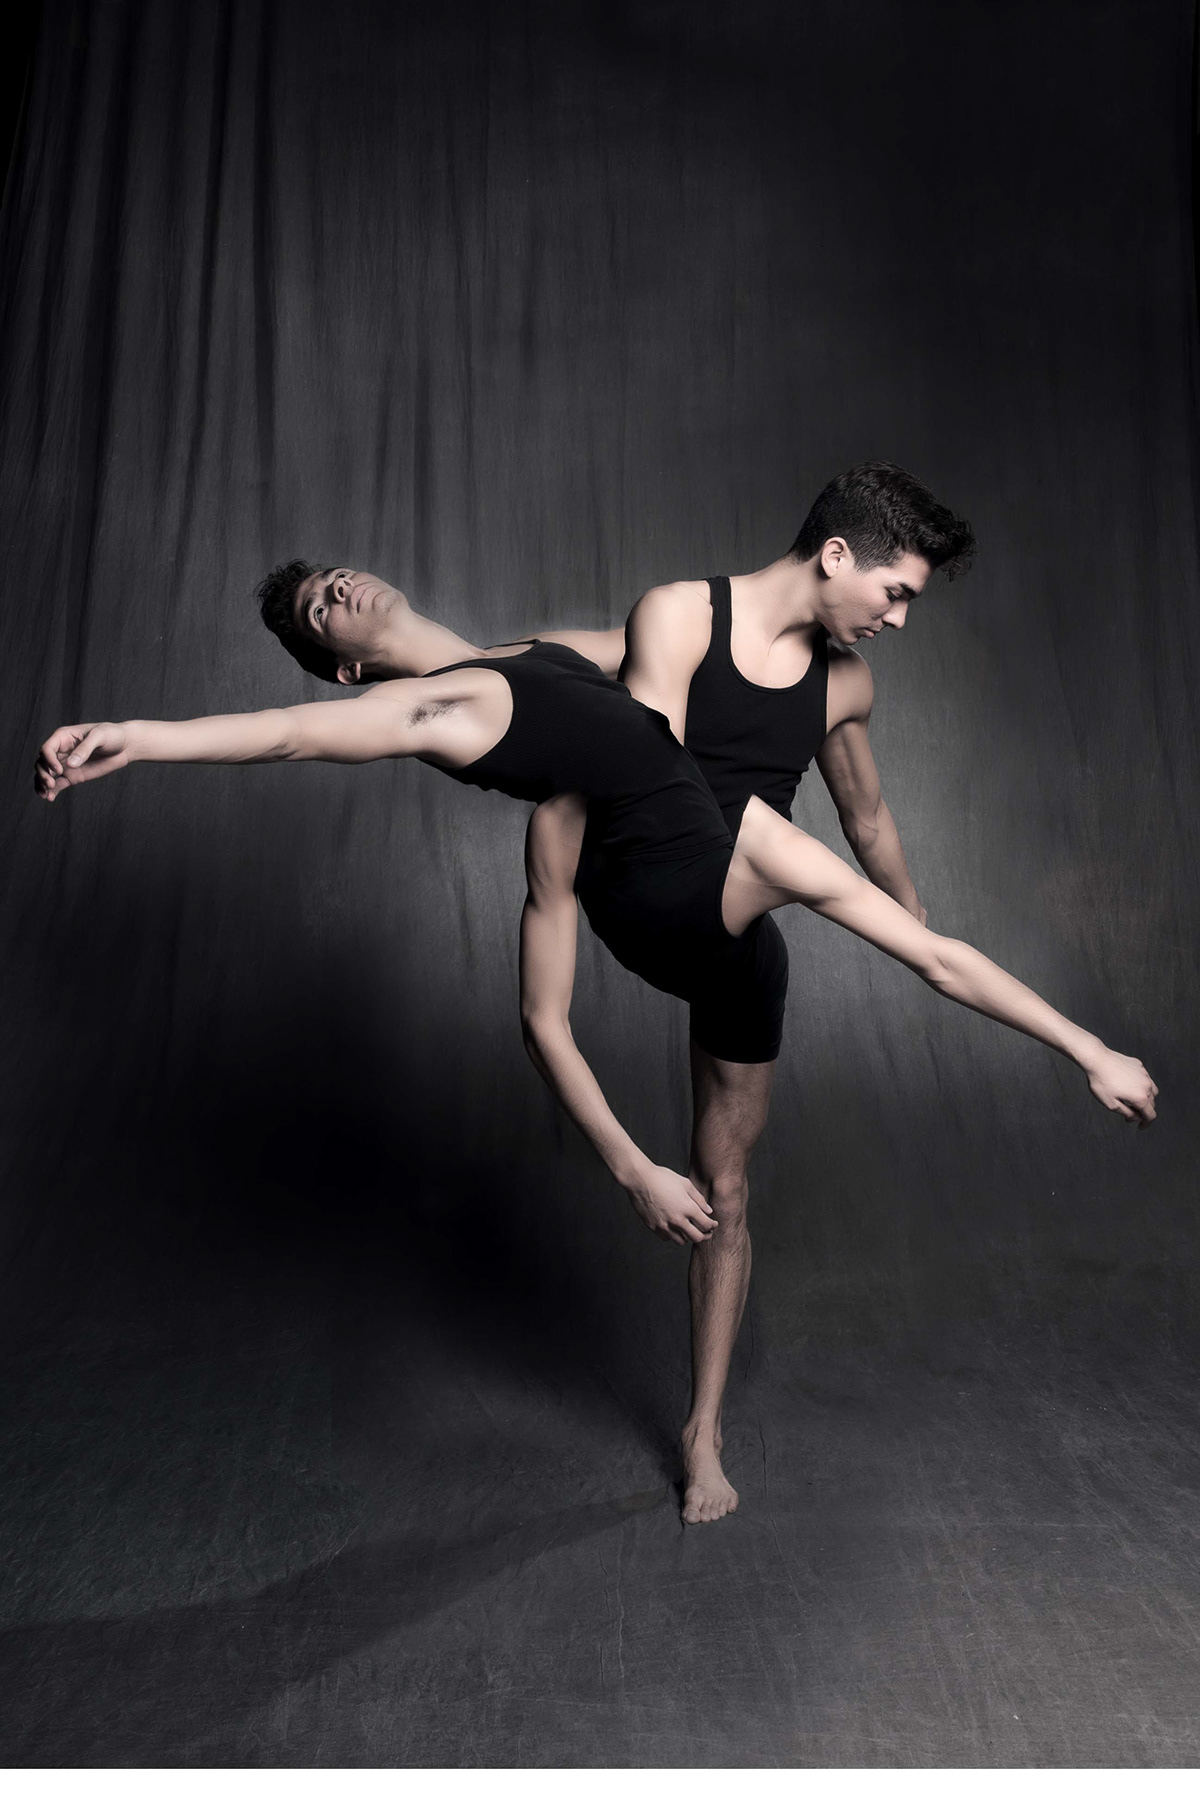 NicholasMark Backs  back project dancers  history bodies contrasting black and white Soft Colors